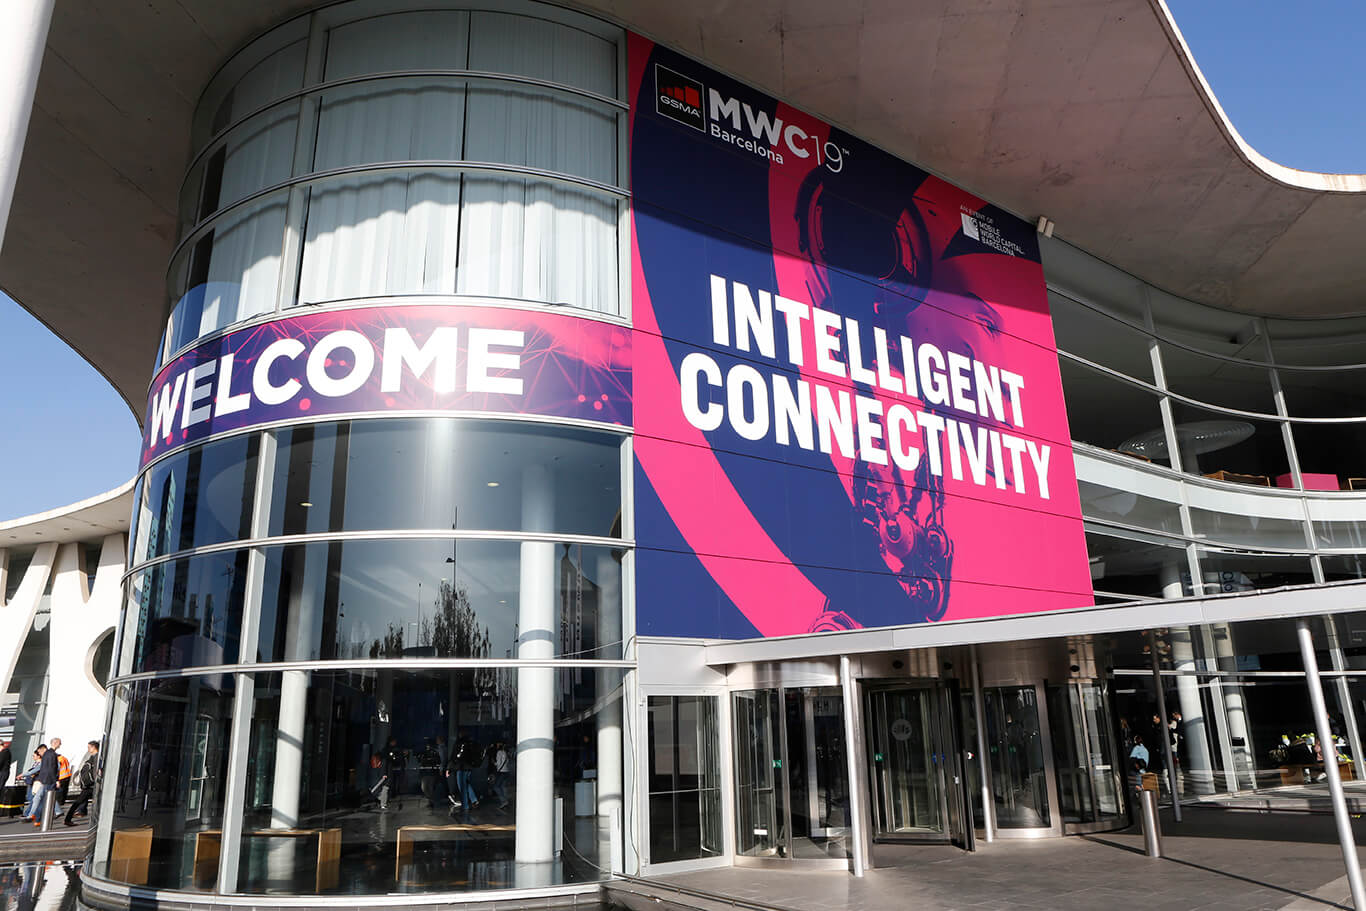 The main trends from Mobile World Congress 2019 in Barcelona